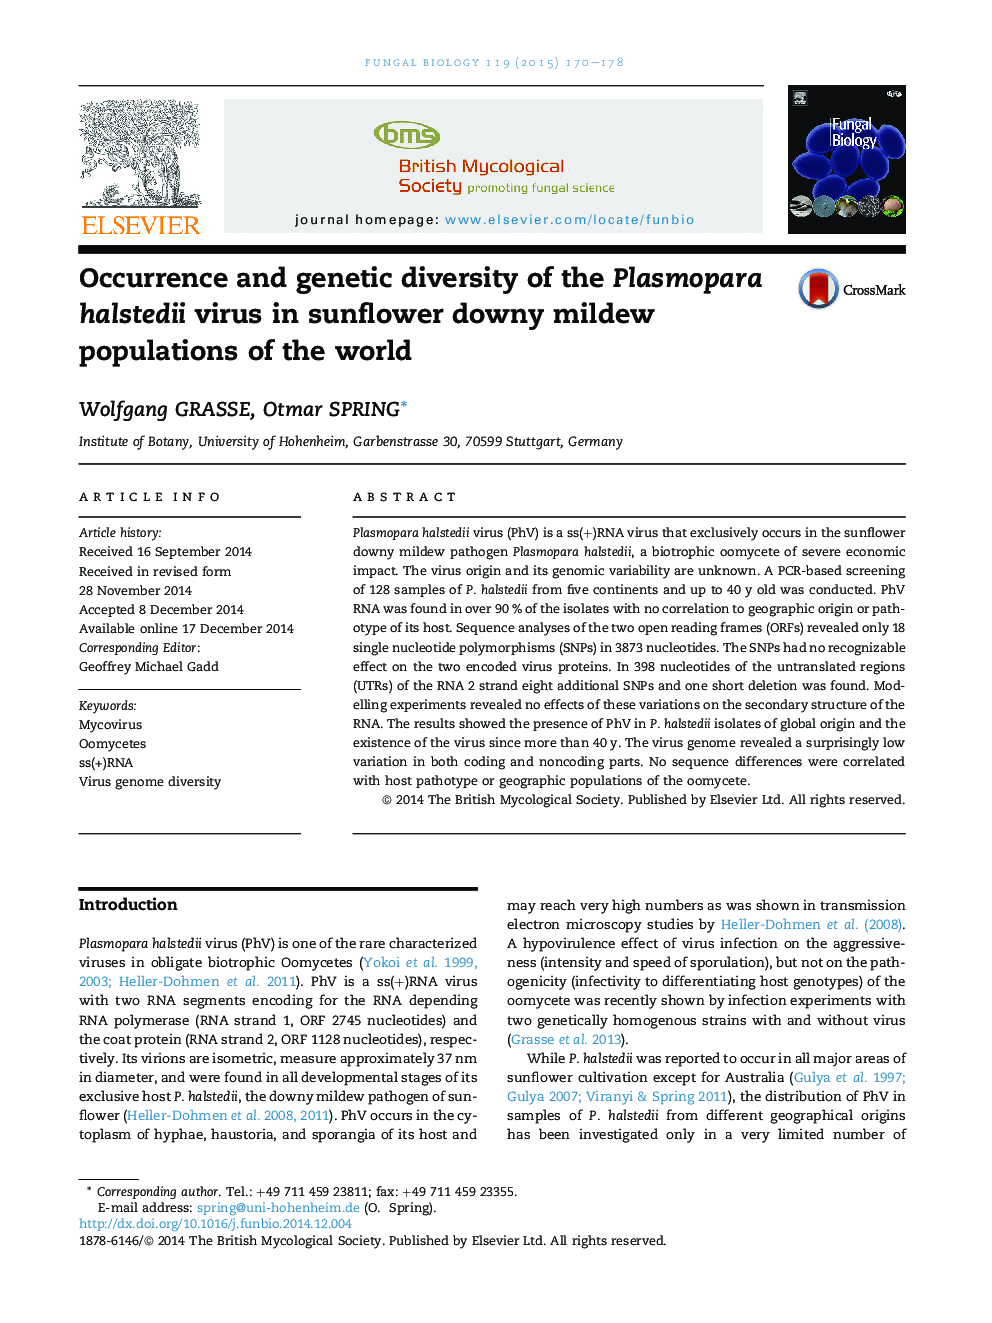 Occurrence and genetic diversity of the Plasmopara halstedii virus in sunflower downy mildew populations of the world